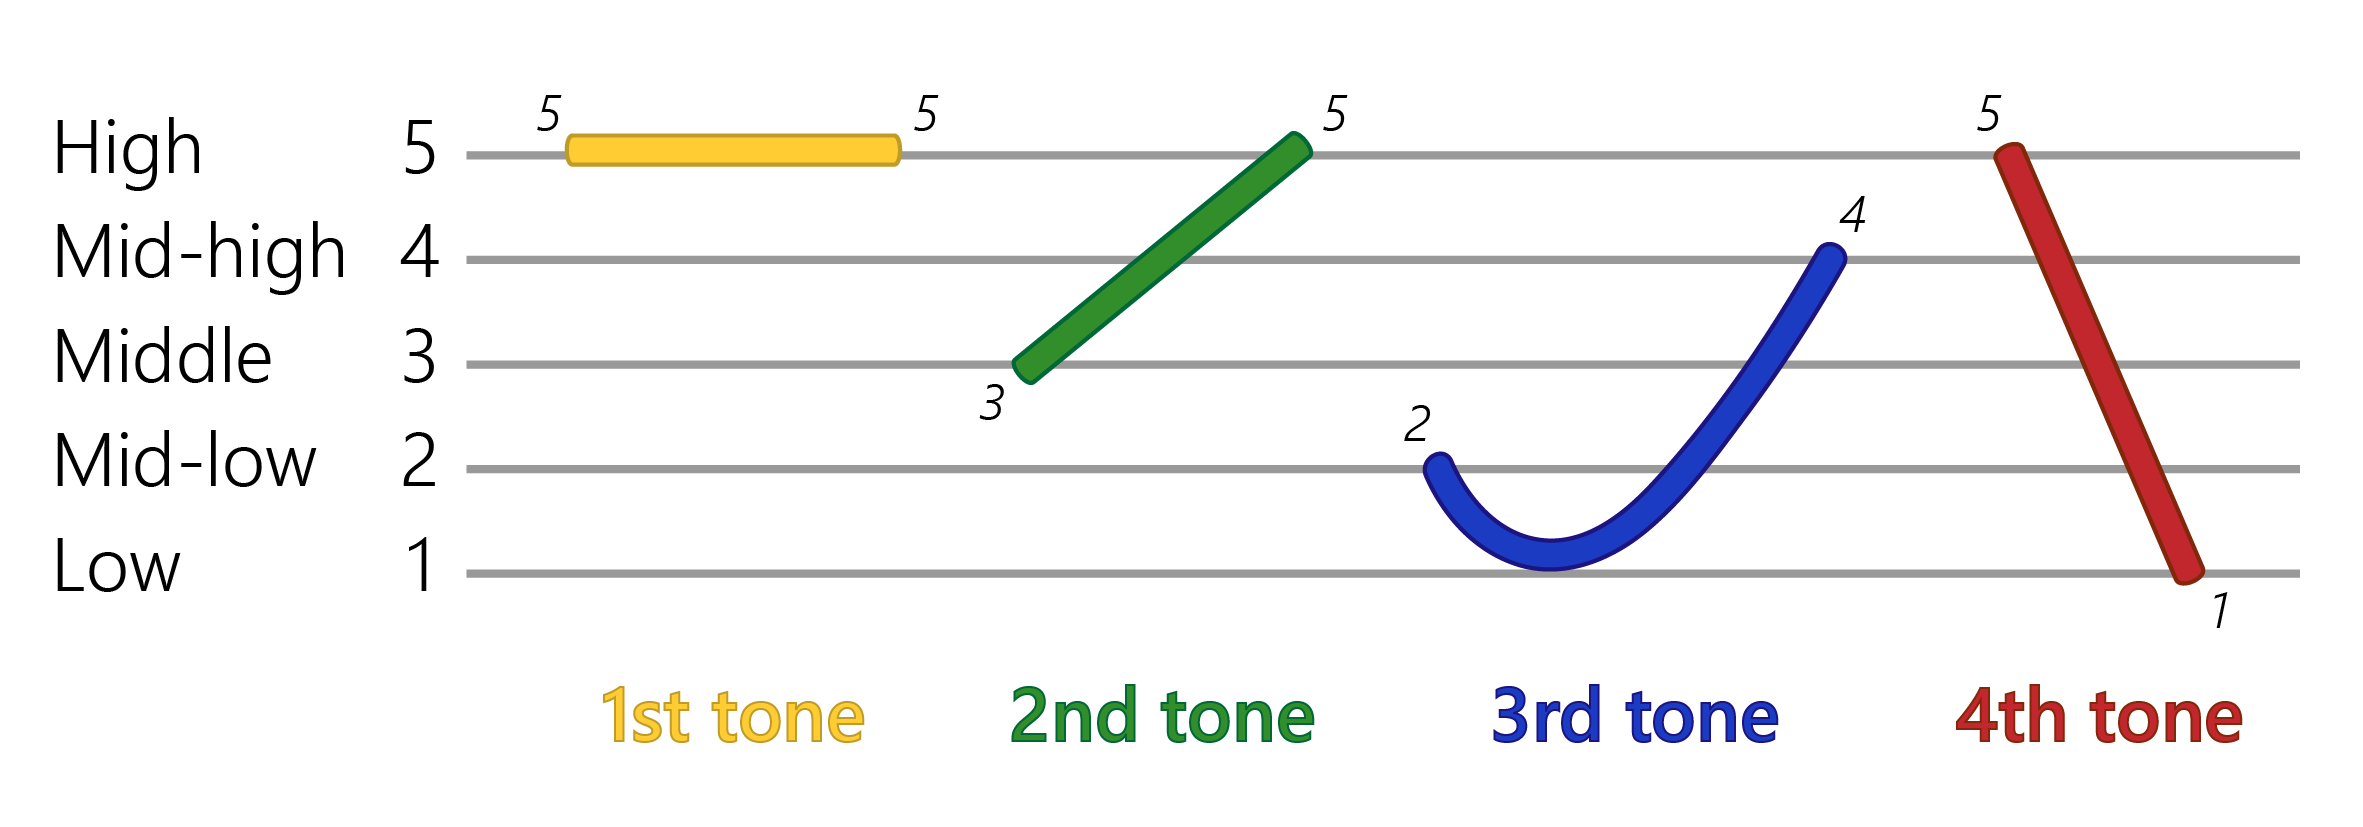 Tone chart graphic depicting the four tones of Mandarin Chinese. The first tone is a even tone in the high range. The second tone starts in the middle range and rises to the high range. The third tone starts in the mid-low range and dips into the low range before rising to the mid-high range. The fourth tone starts in the high range and drops all the way to the low range.